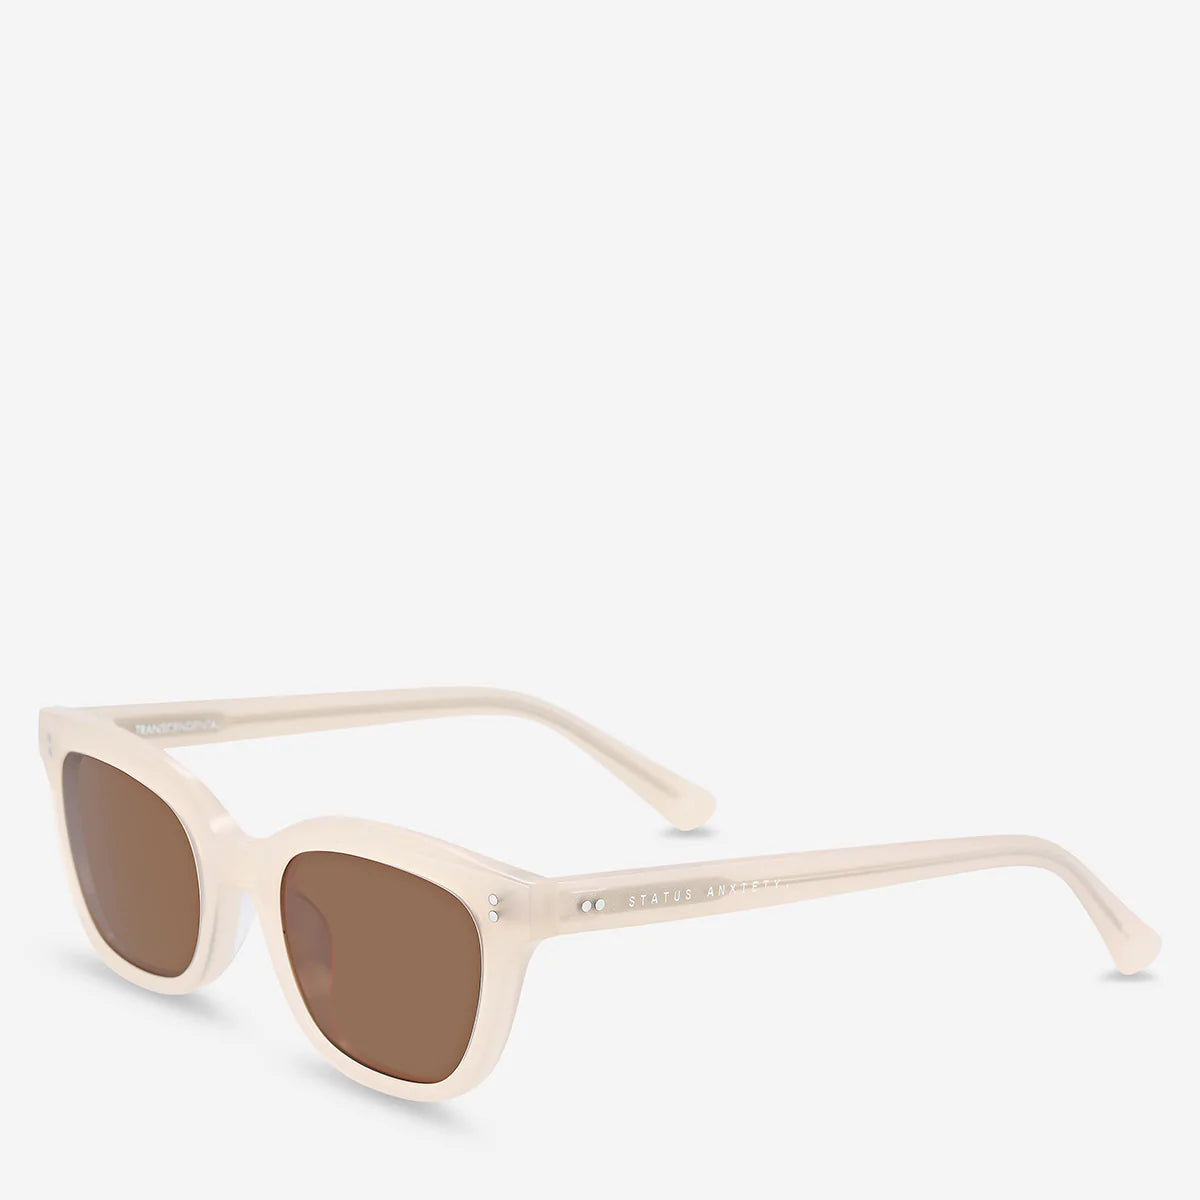 Status Anxiety Transcendental Sunglasses in Nude